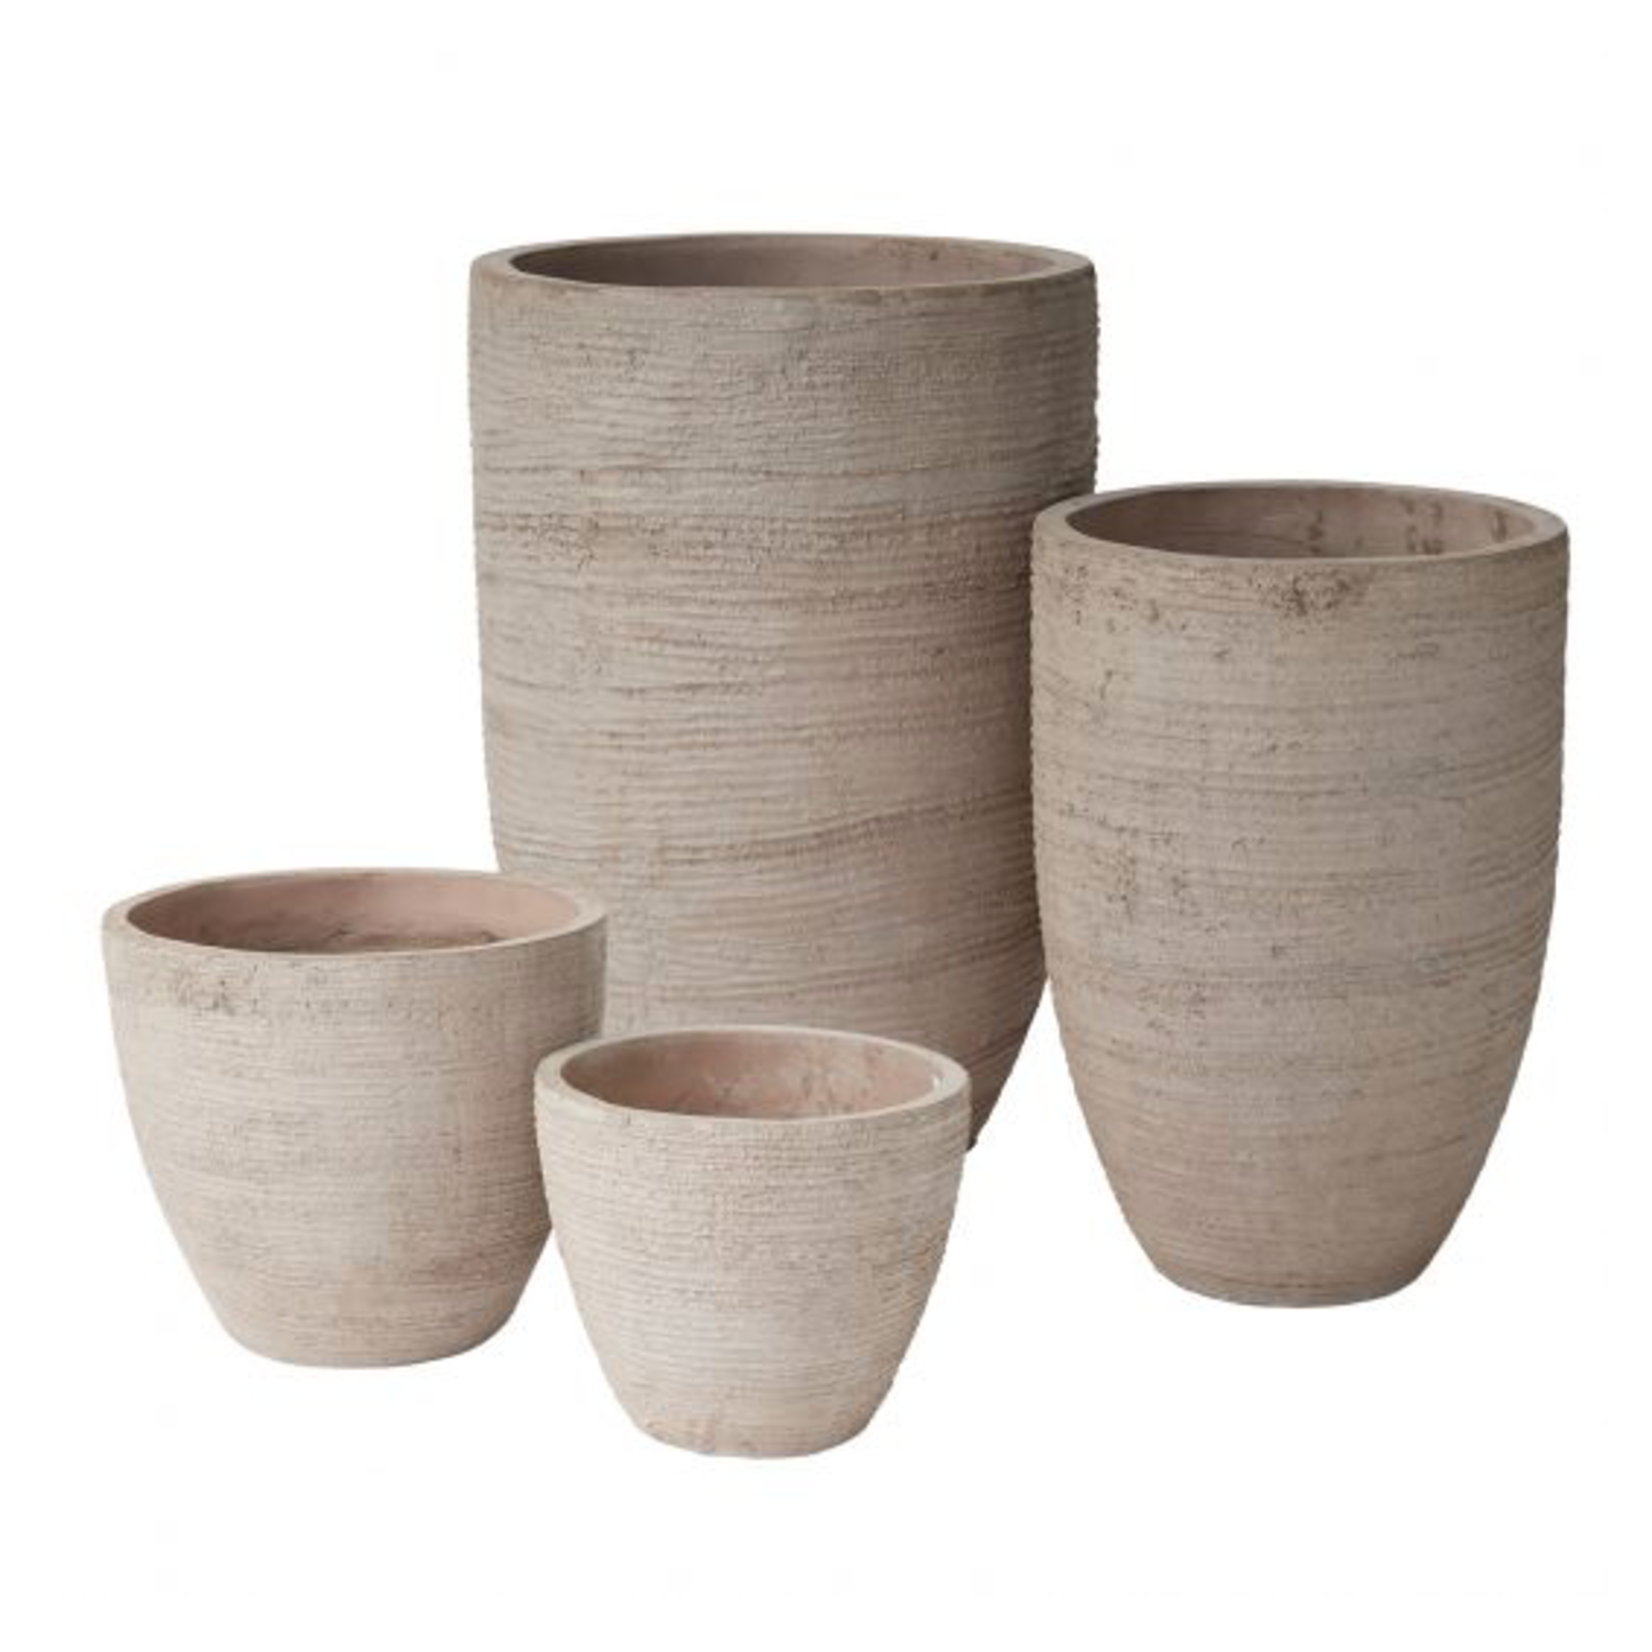 14"x 20.5”H MURPHY PLANTER COLLECTION (AD)